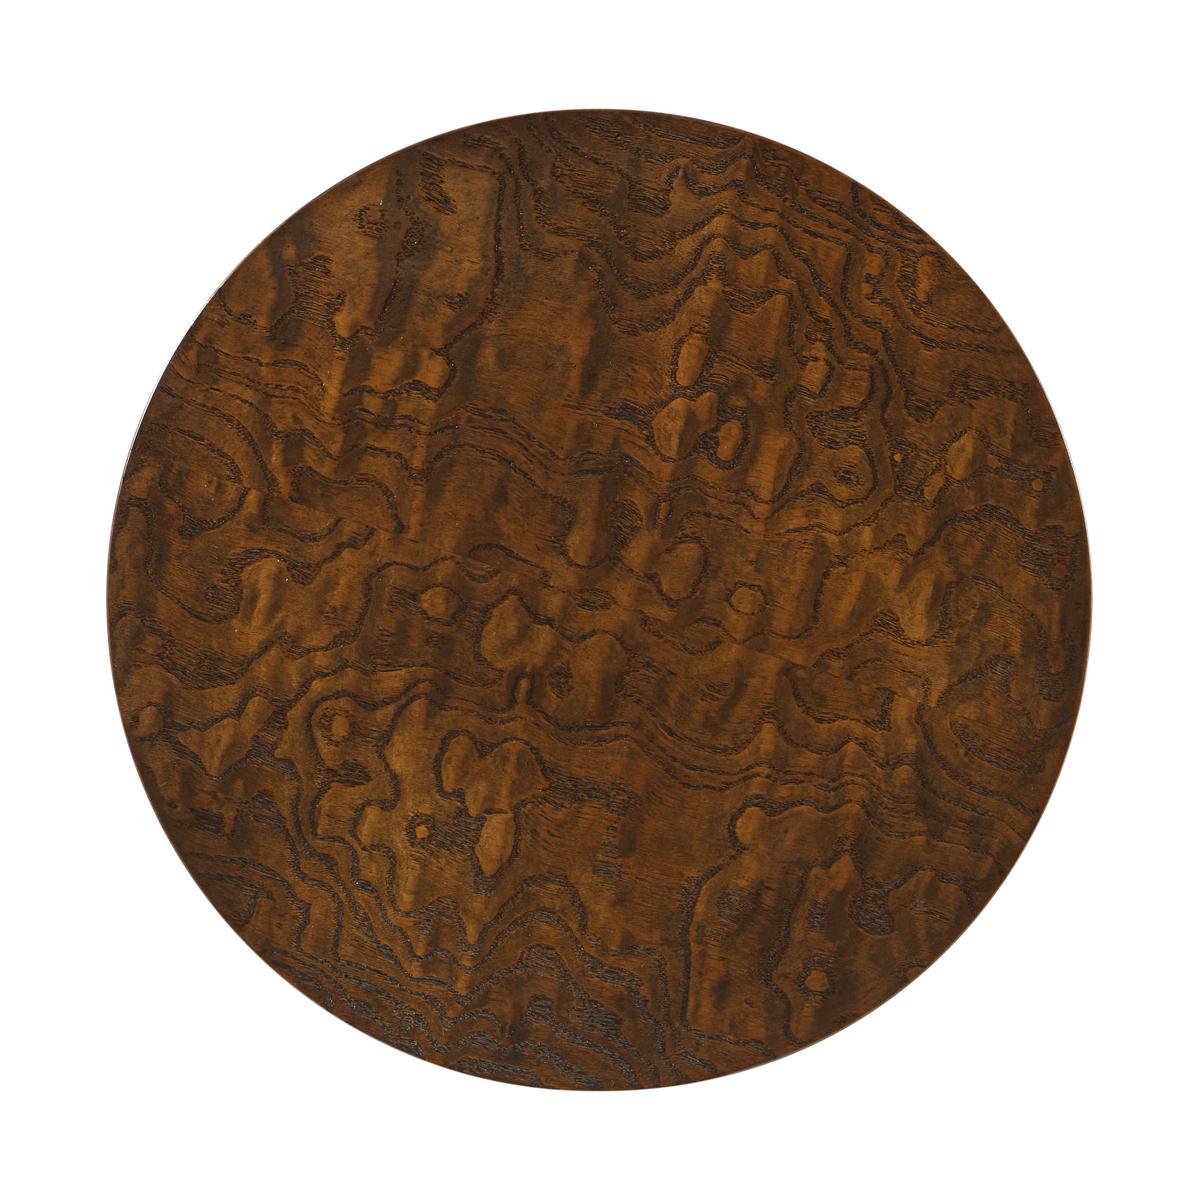 With a Tamo Ash burl veneer round top above a slender, sculptural leaning faux bois frame on a flat disc base.

Dimensions: 14